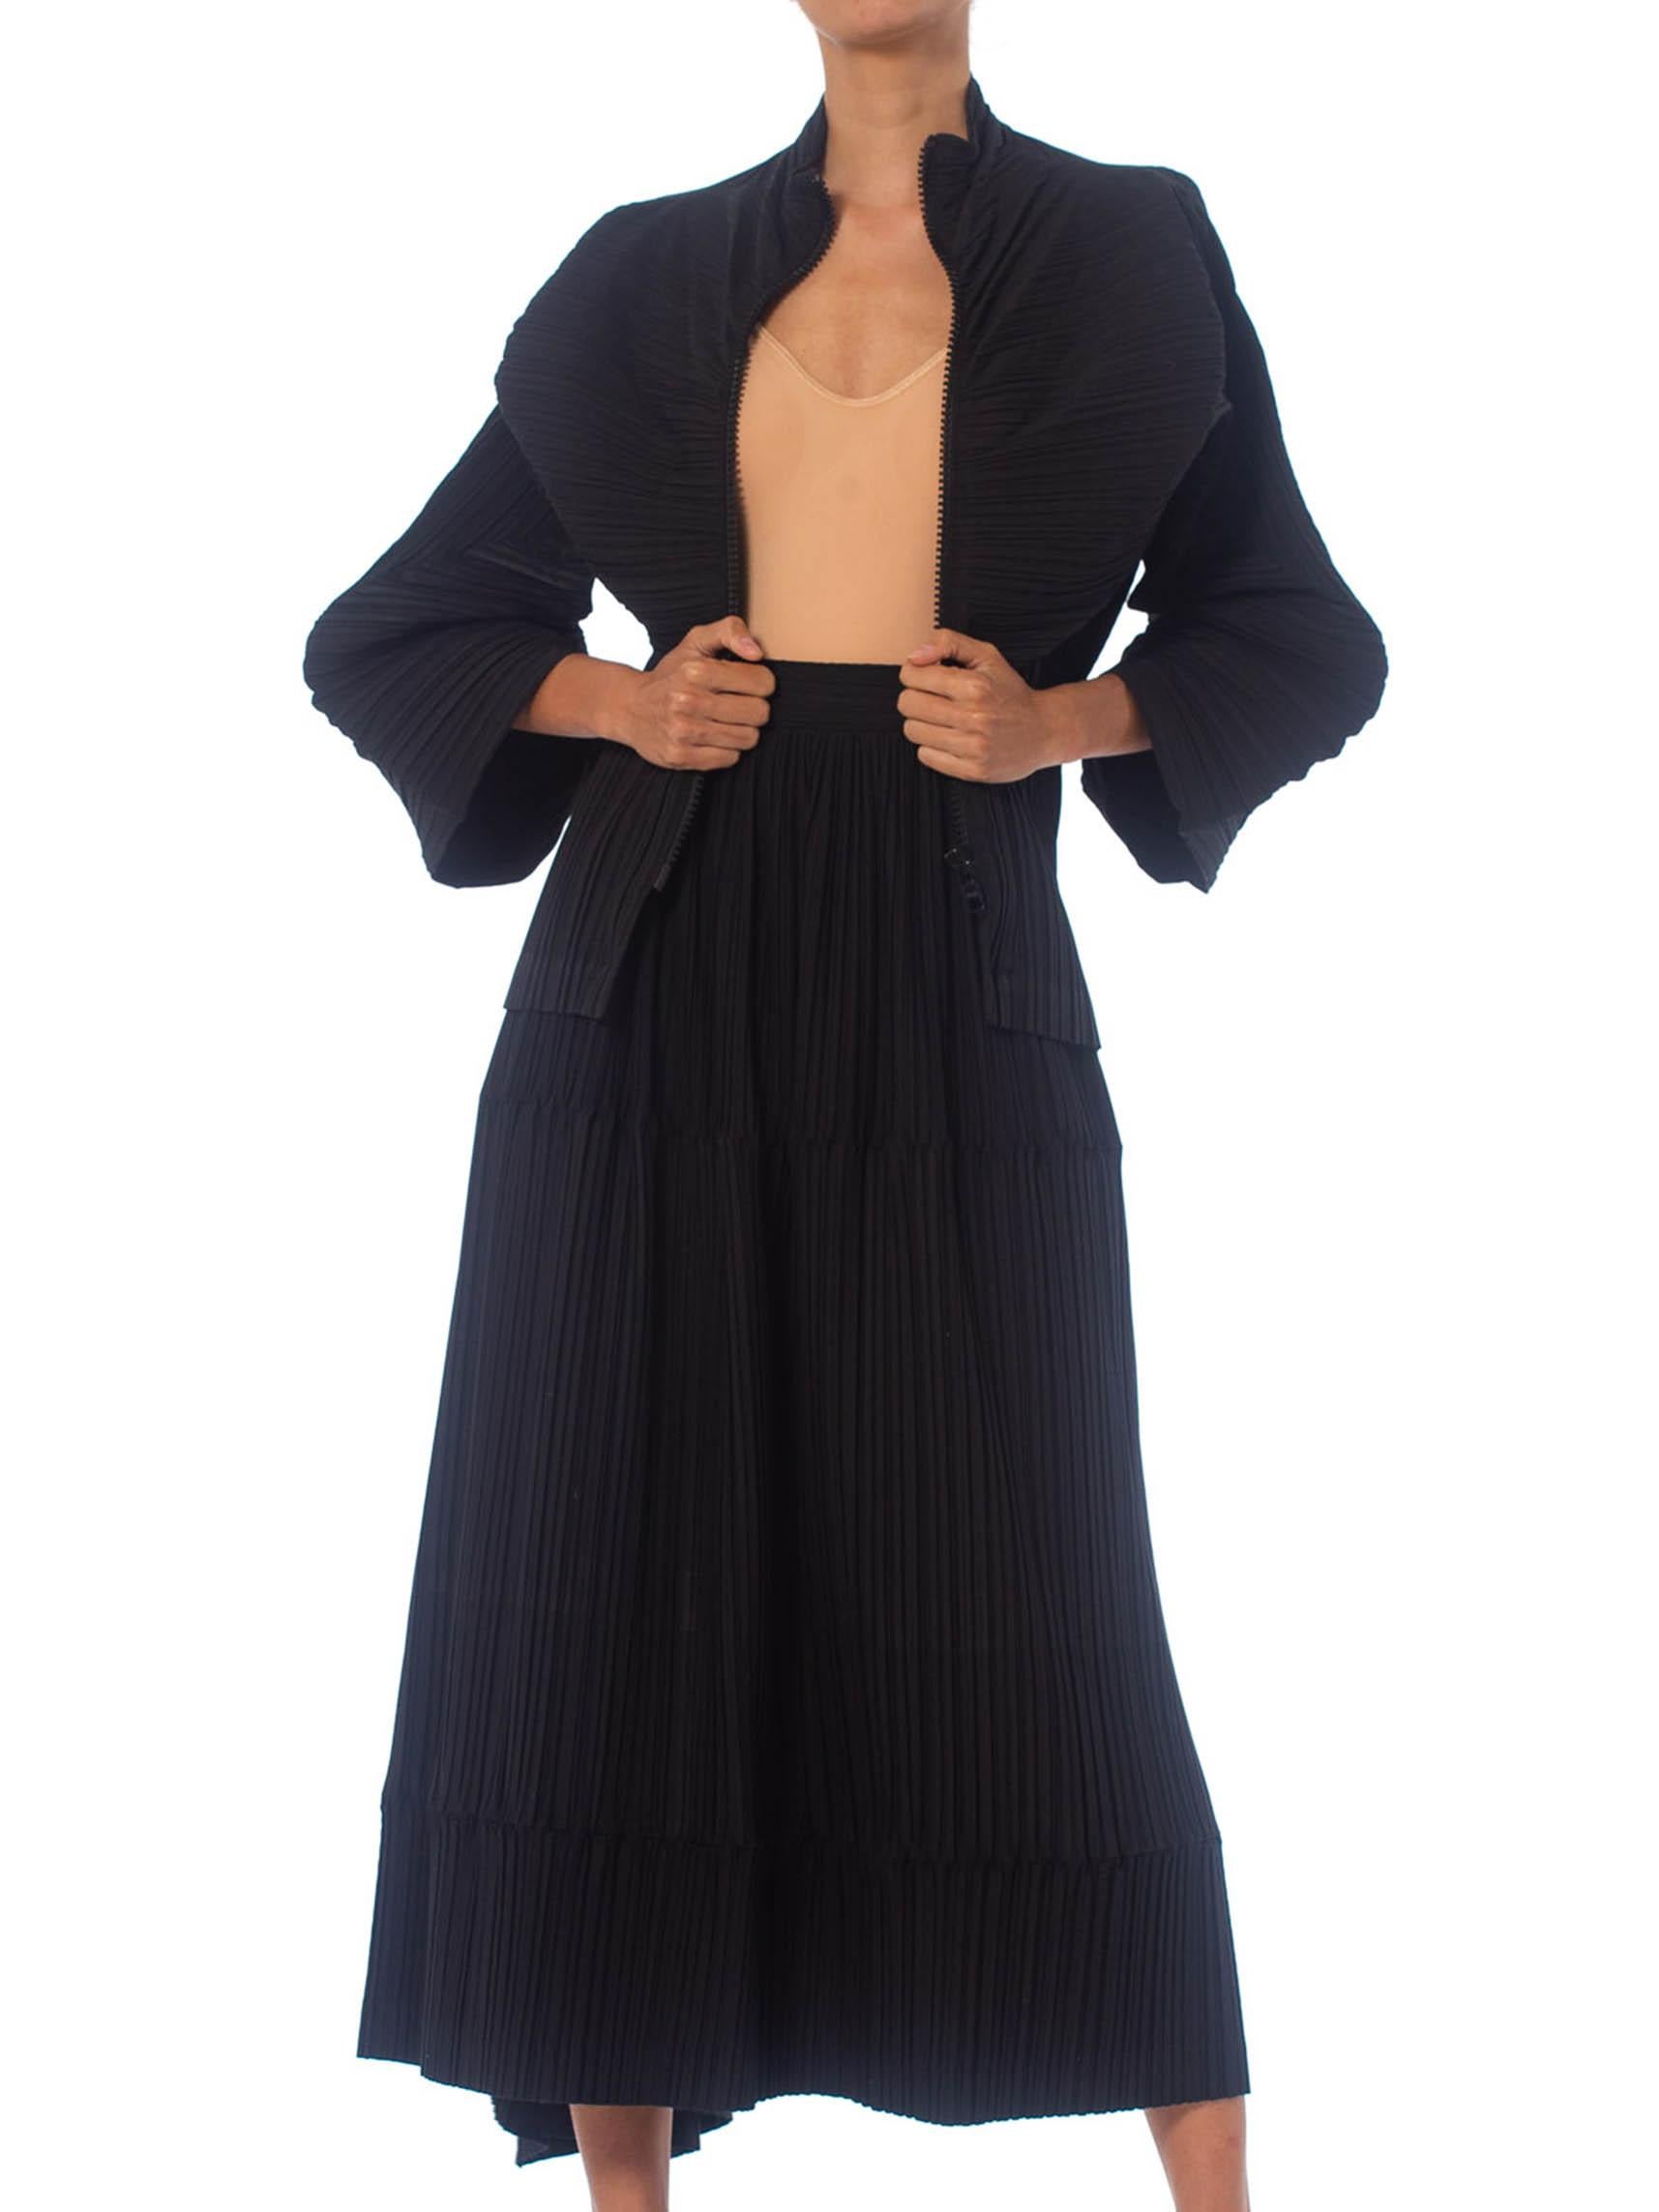 1990S ISSEY MIYAKE Black Pleated Poly Blend Jacket & Skirt Ensemble In Excellent Condition For Sale In New York, NY